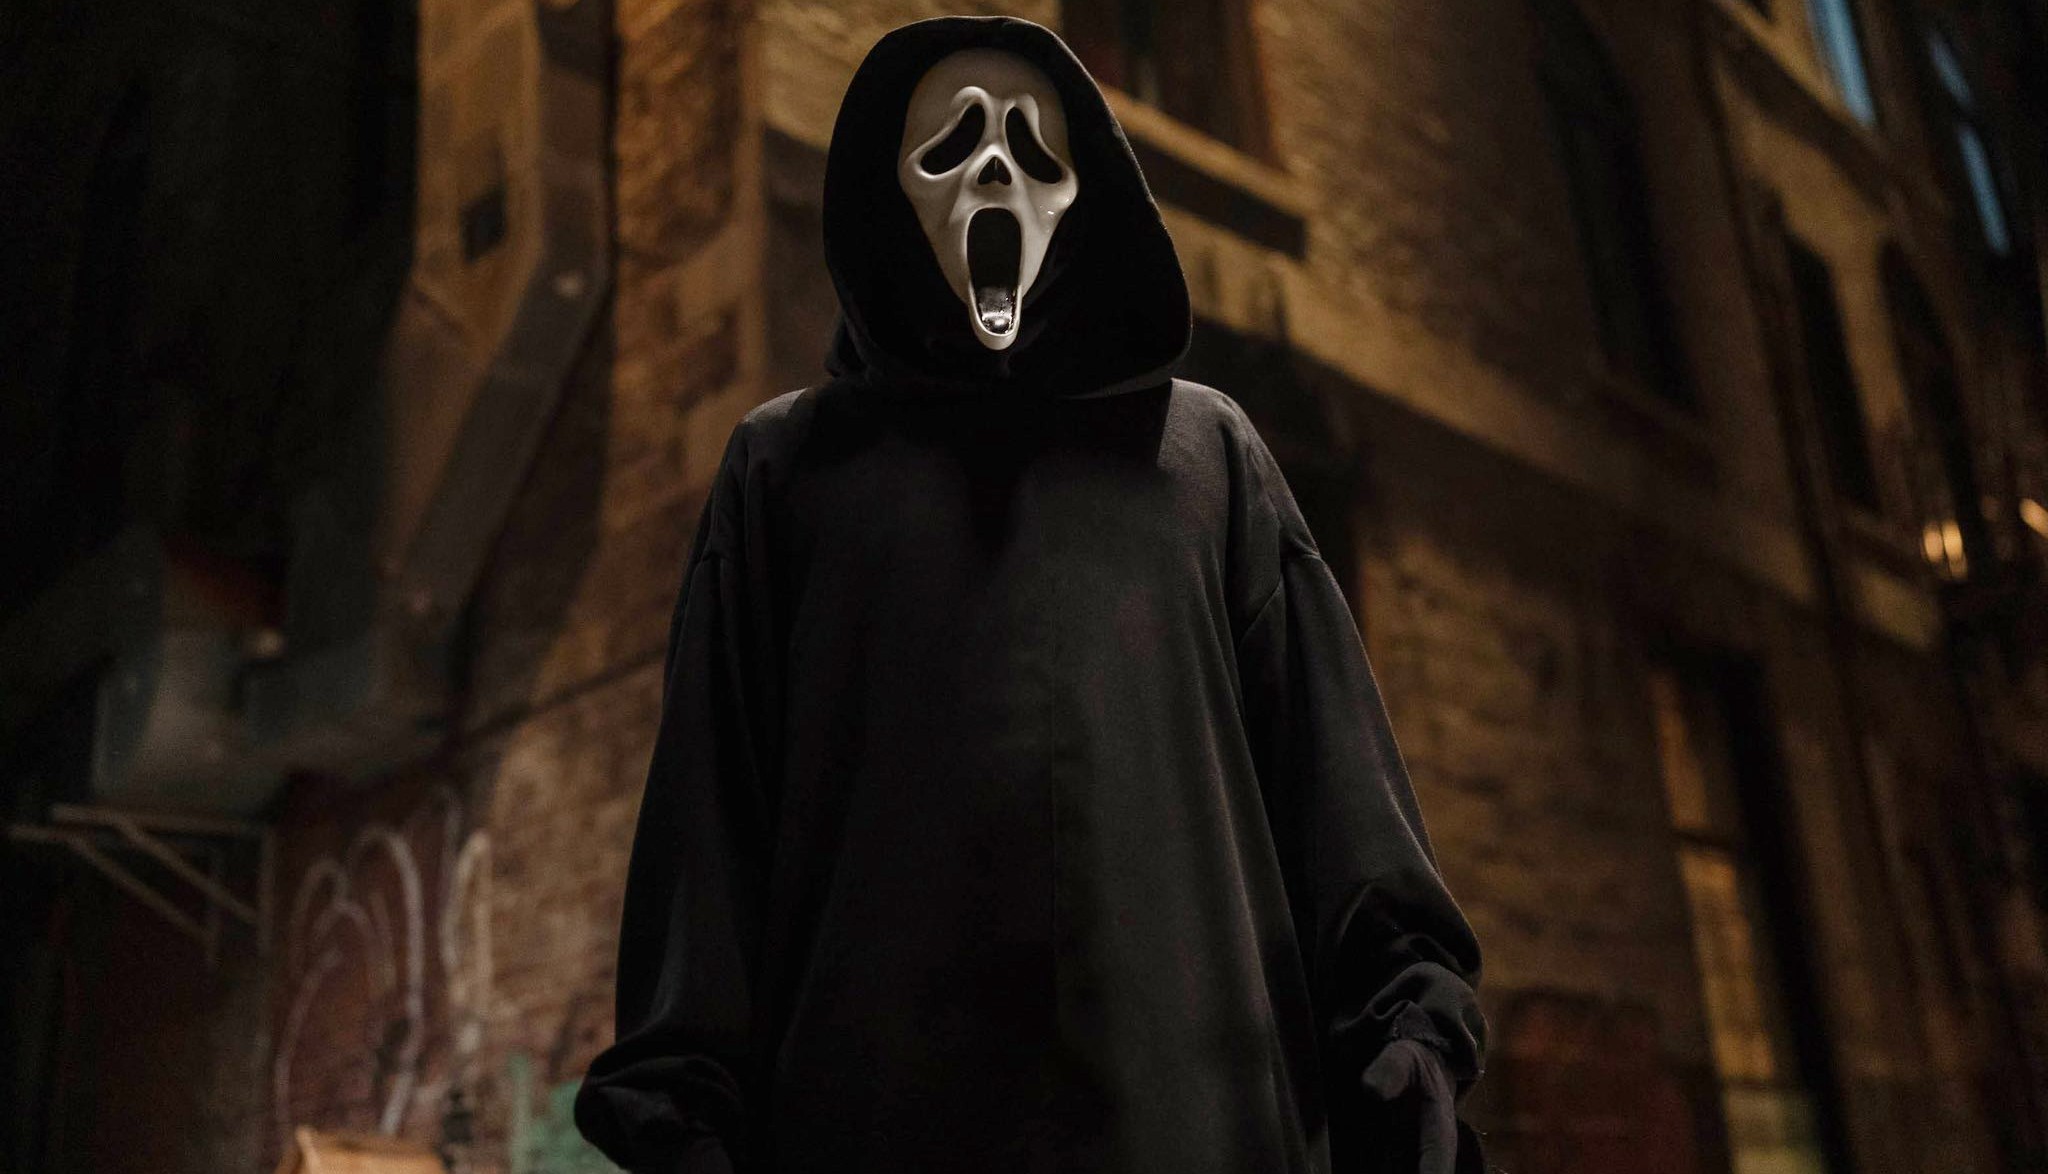 How to watch every Scream movie just in time for Scream 6